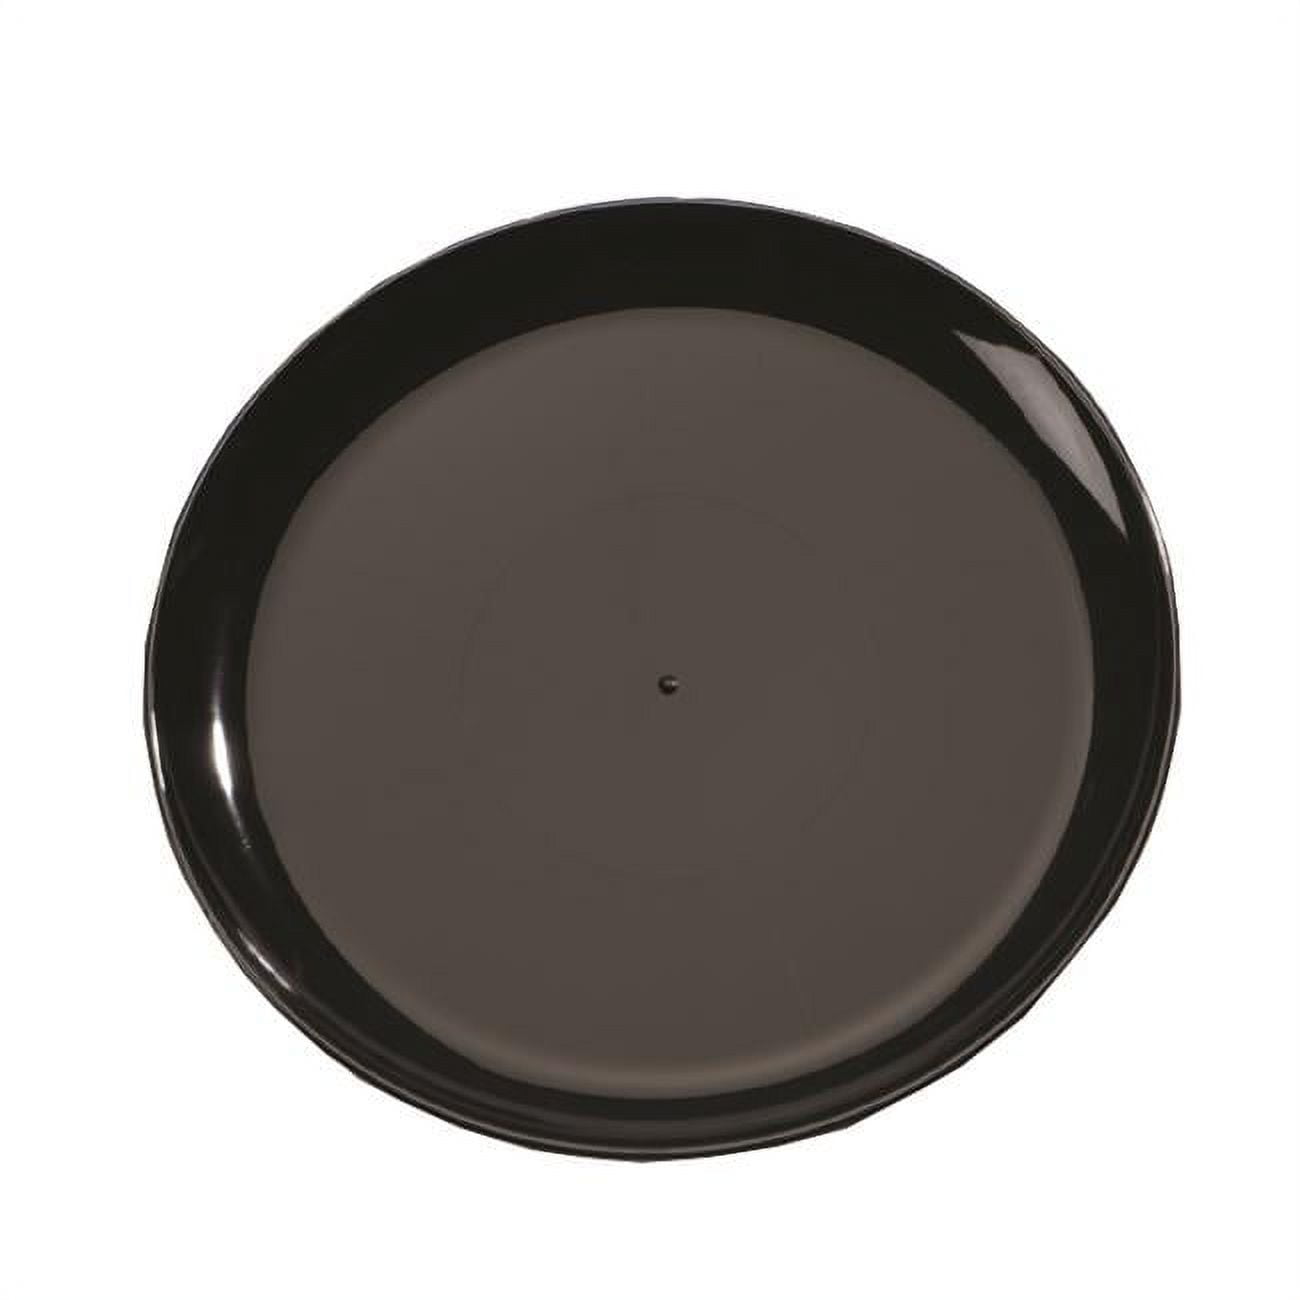 Picture of WNA Comet West A718PBL25 PEC 18 in. Round Catering Tray, Black